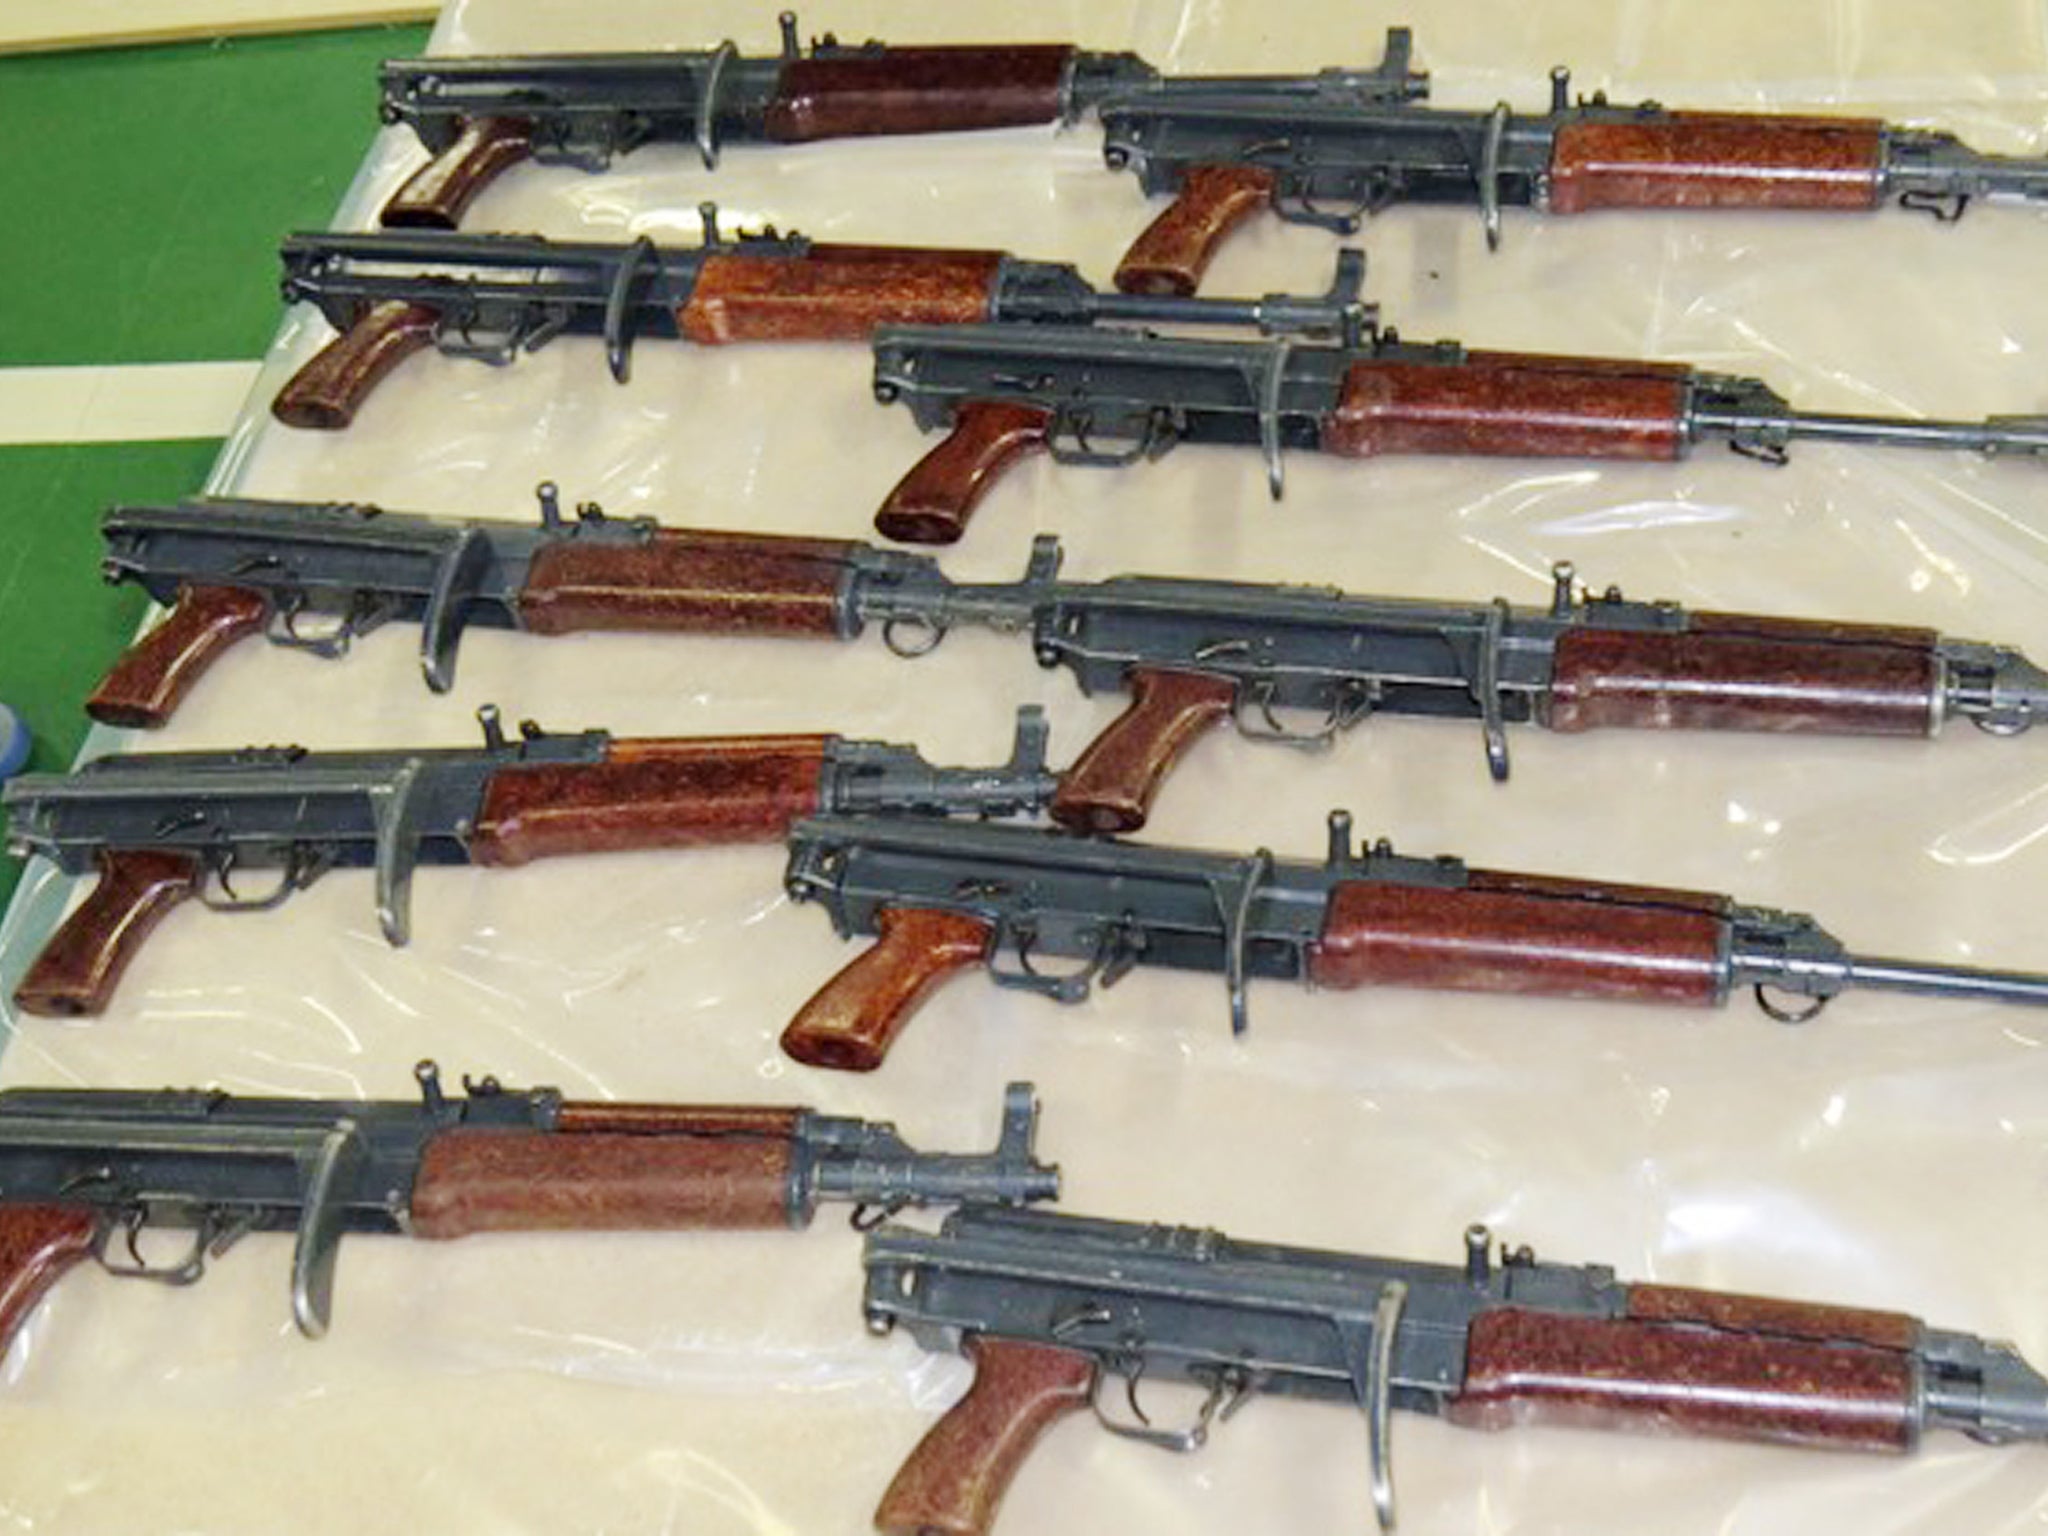 The automatic assault rifles were seized during a raid in Kent